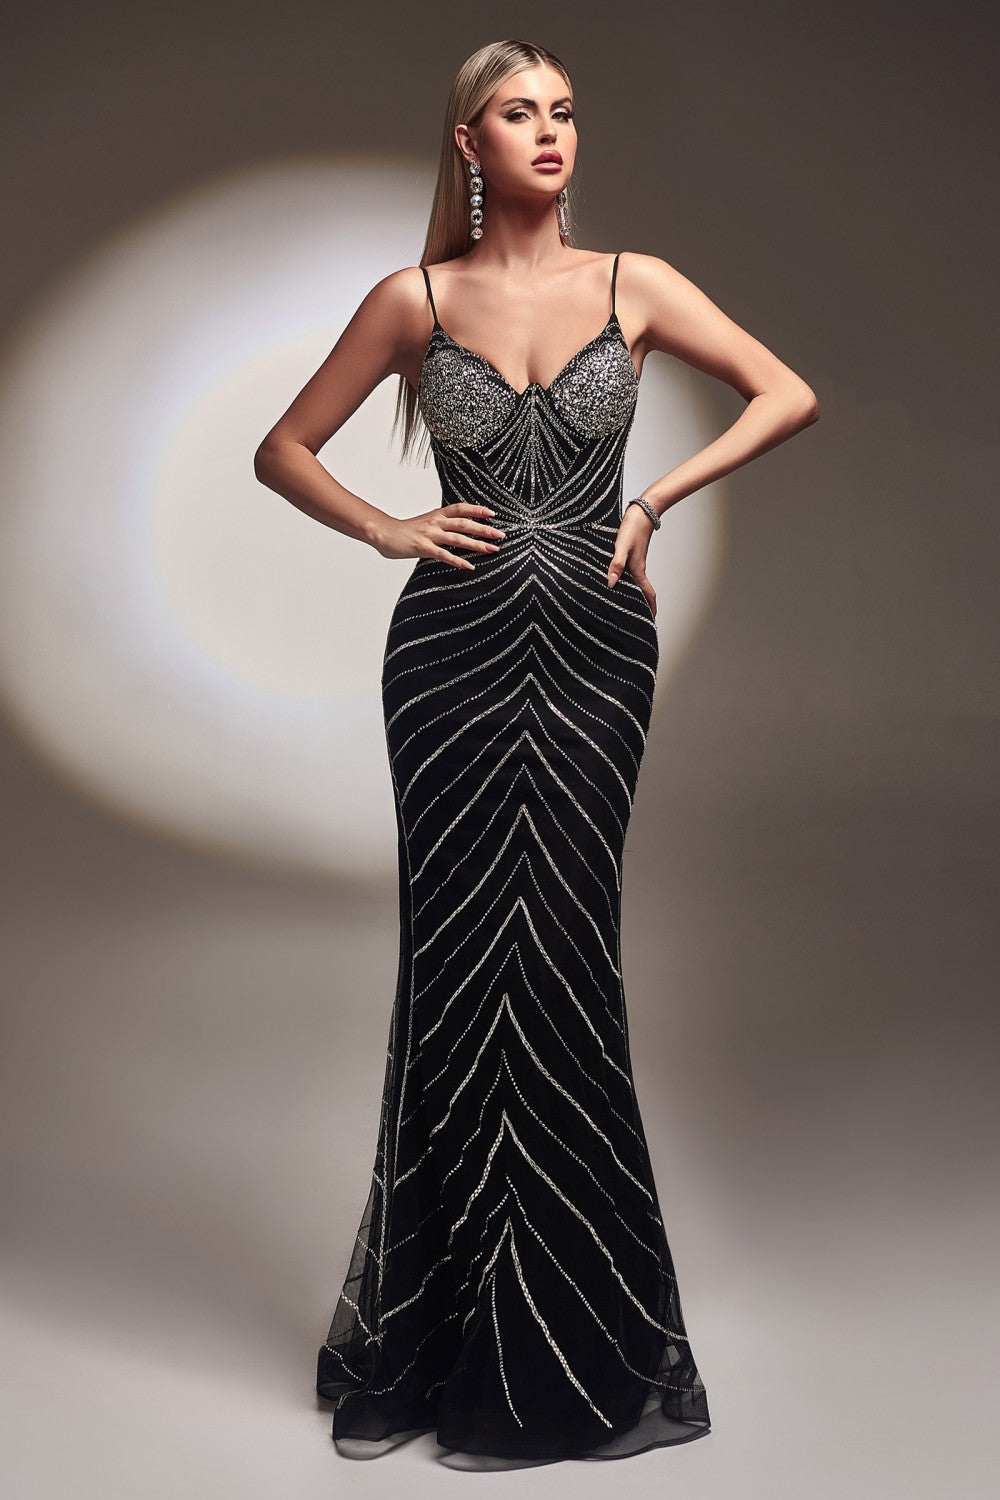 Black Sweetheart Beaded Mermaid Gown CR866 - Women Evening Formal Gown - Special Occasion-Curves